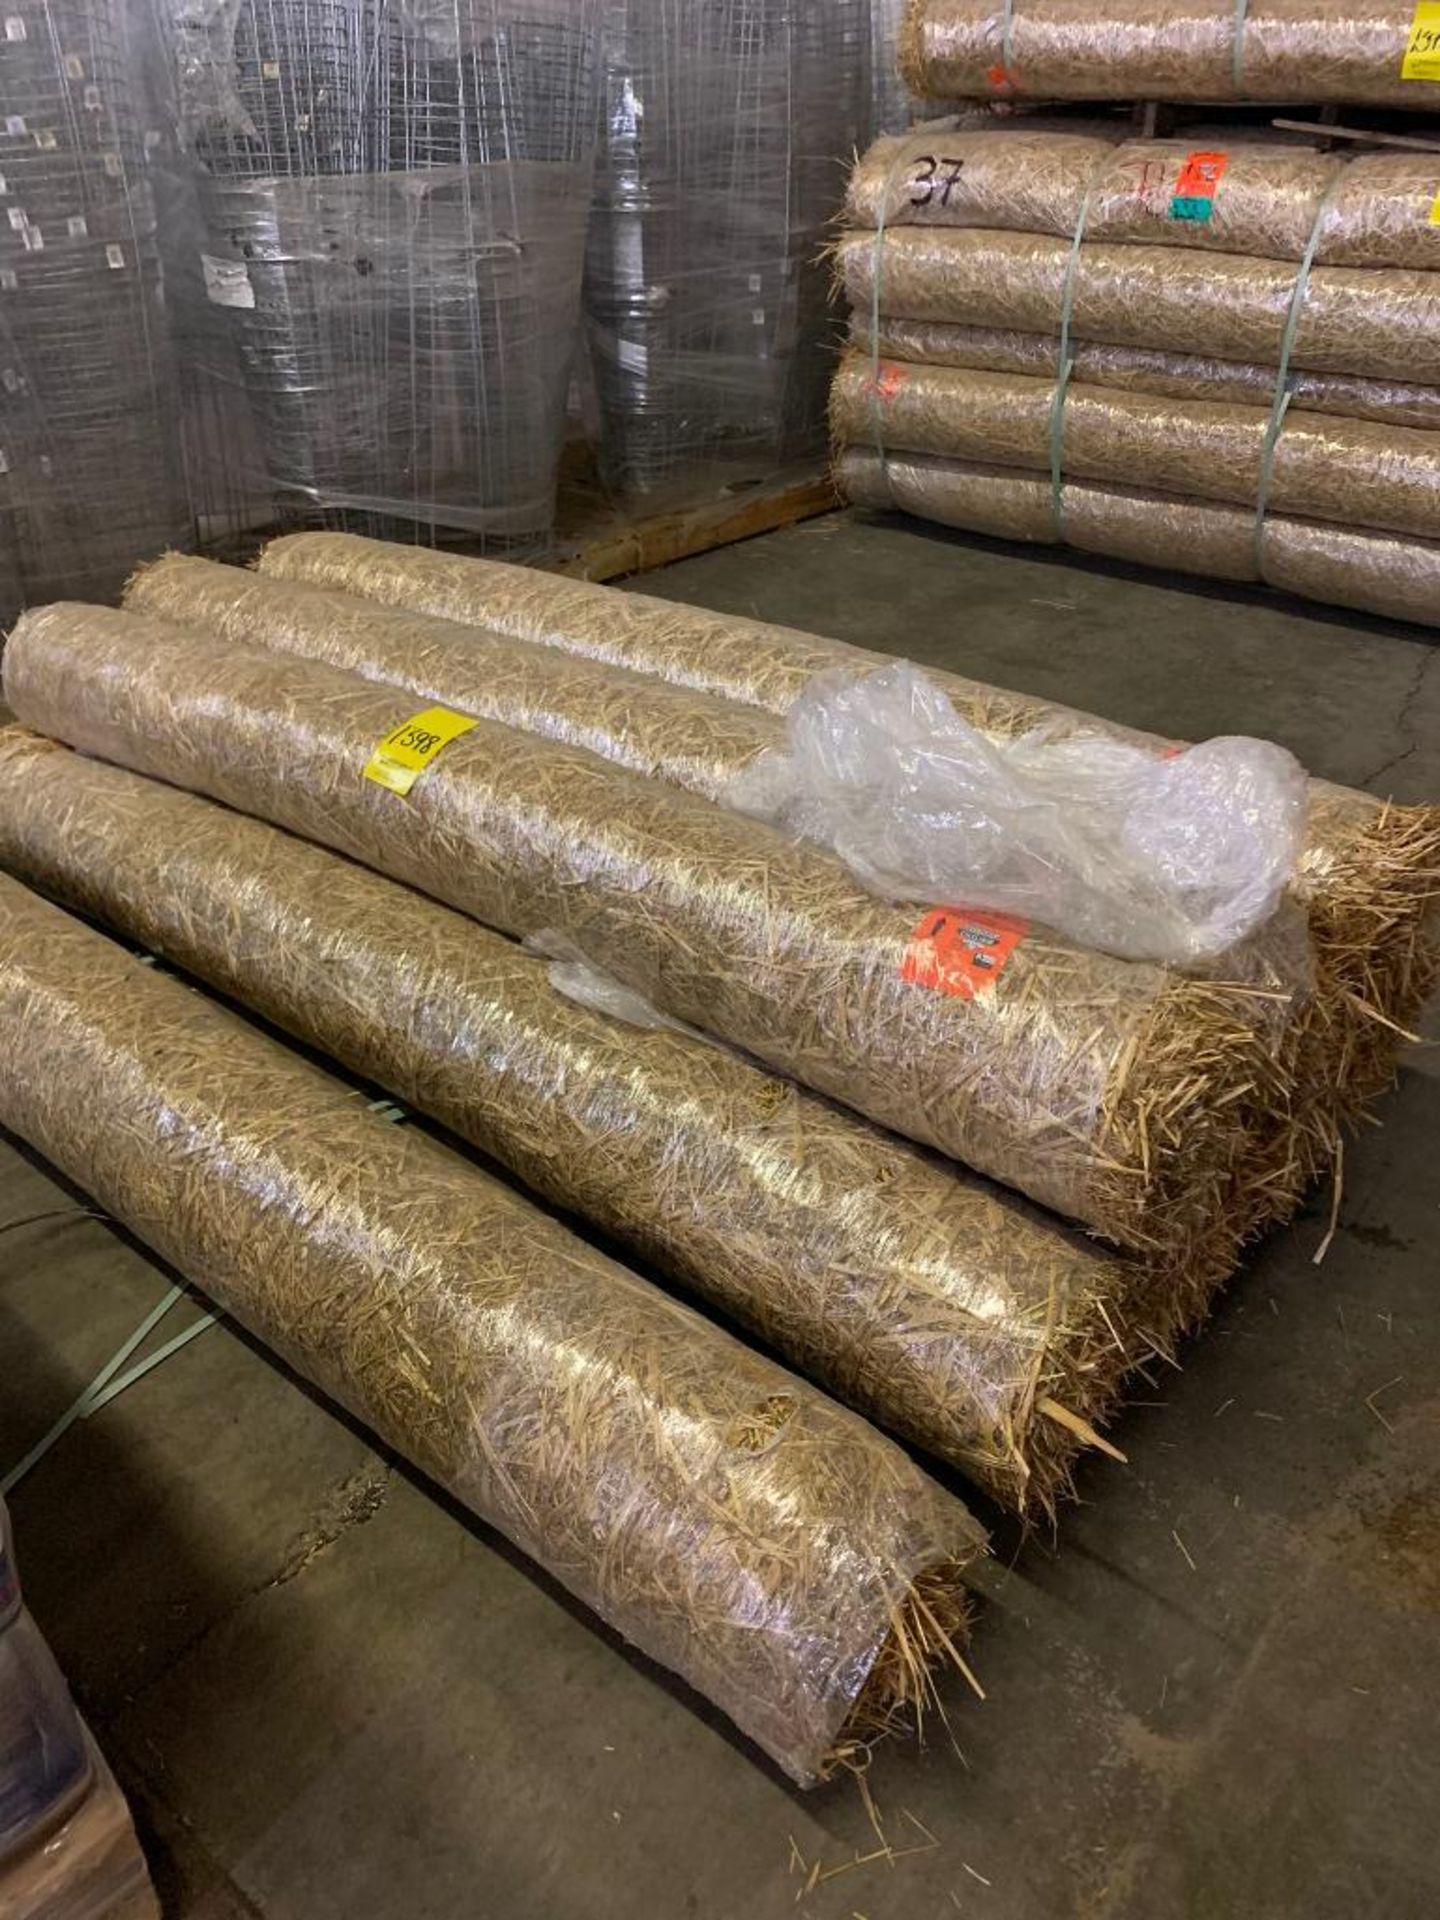 Mud Control Fabric Rolls, Straw Erosion Control Blankets, Netting, Wood Stakes - Image 3 of 10